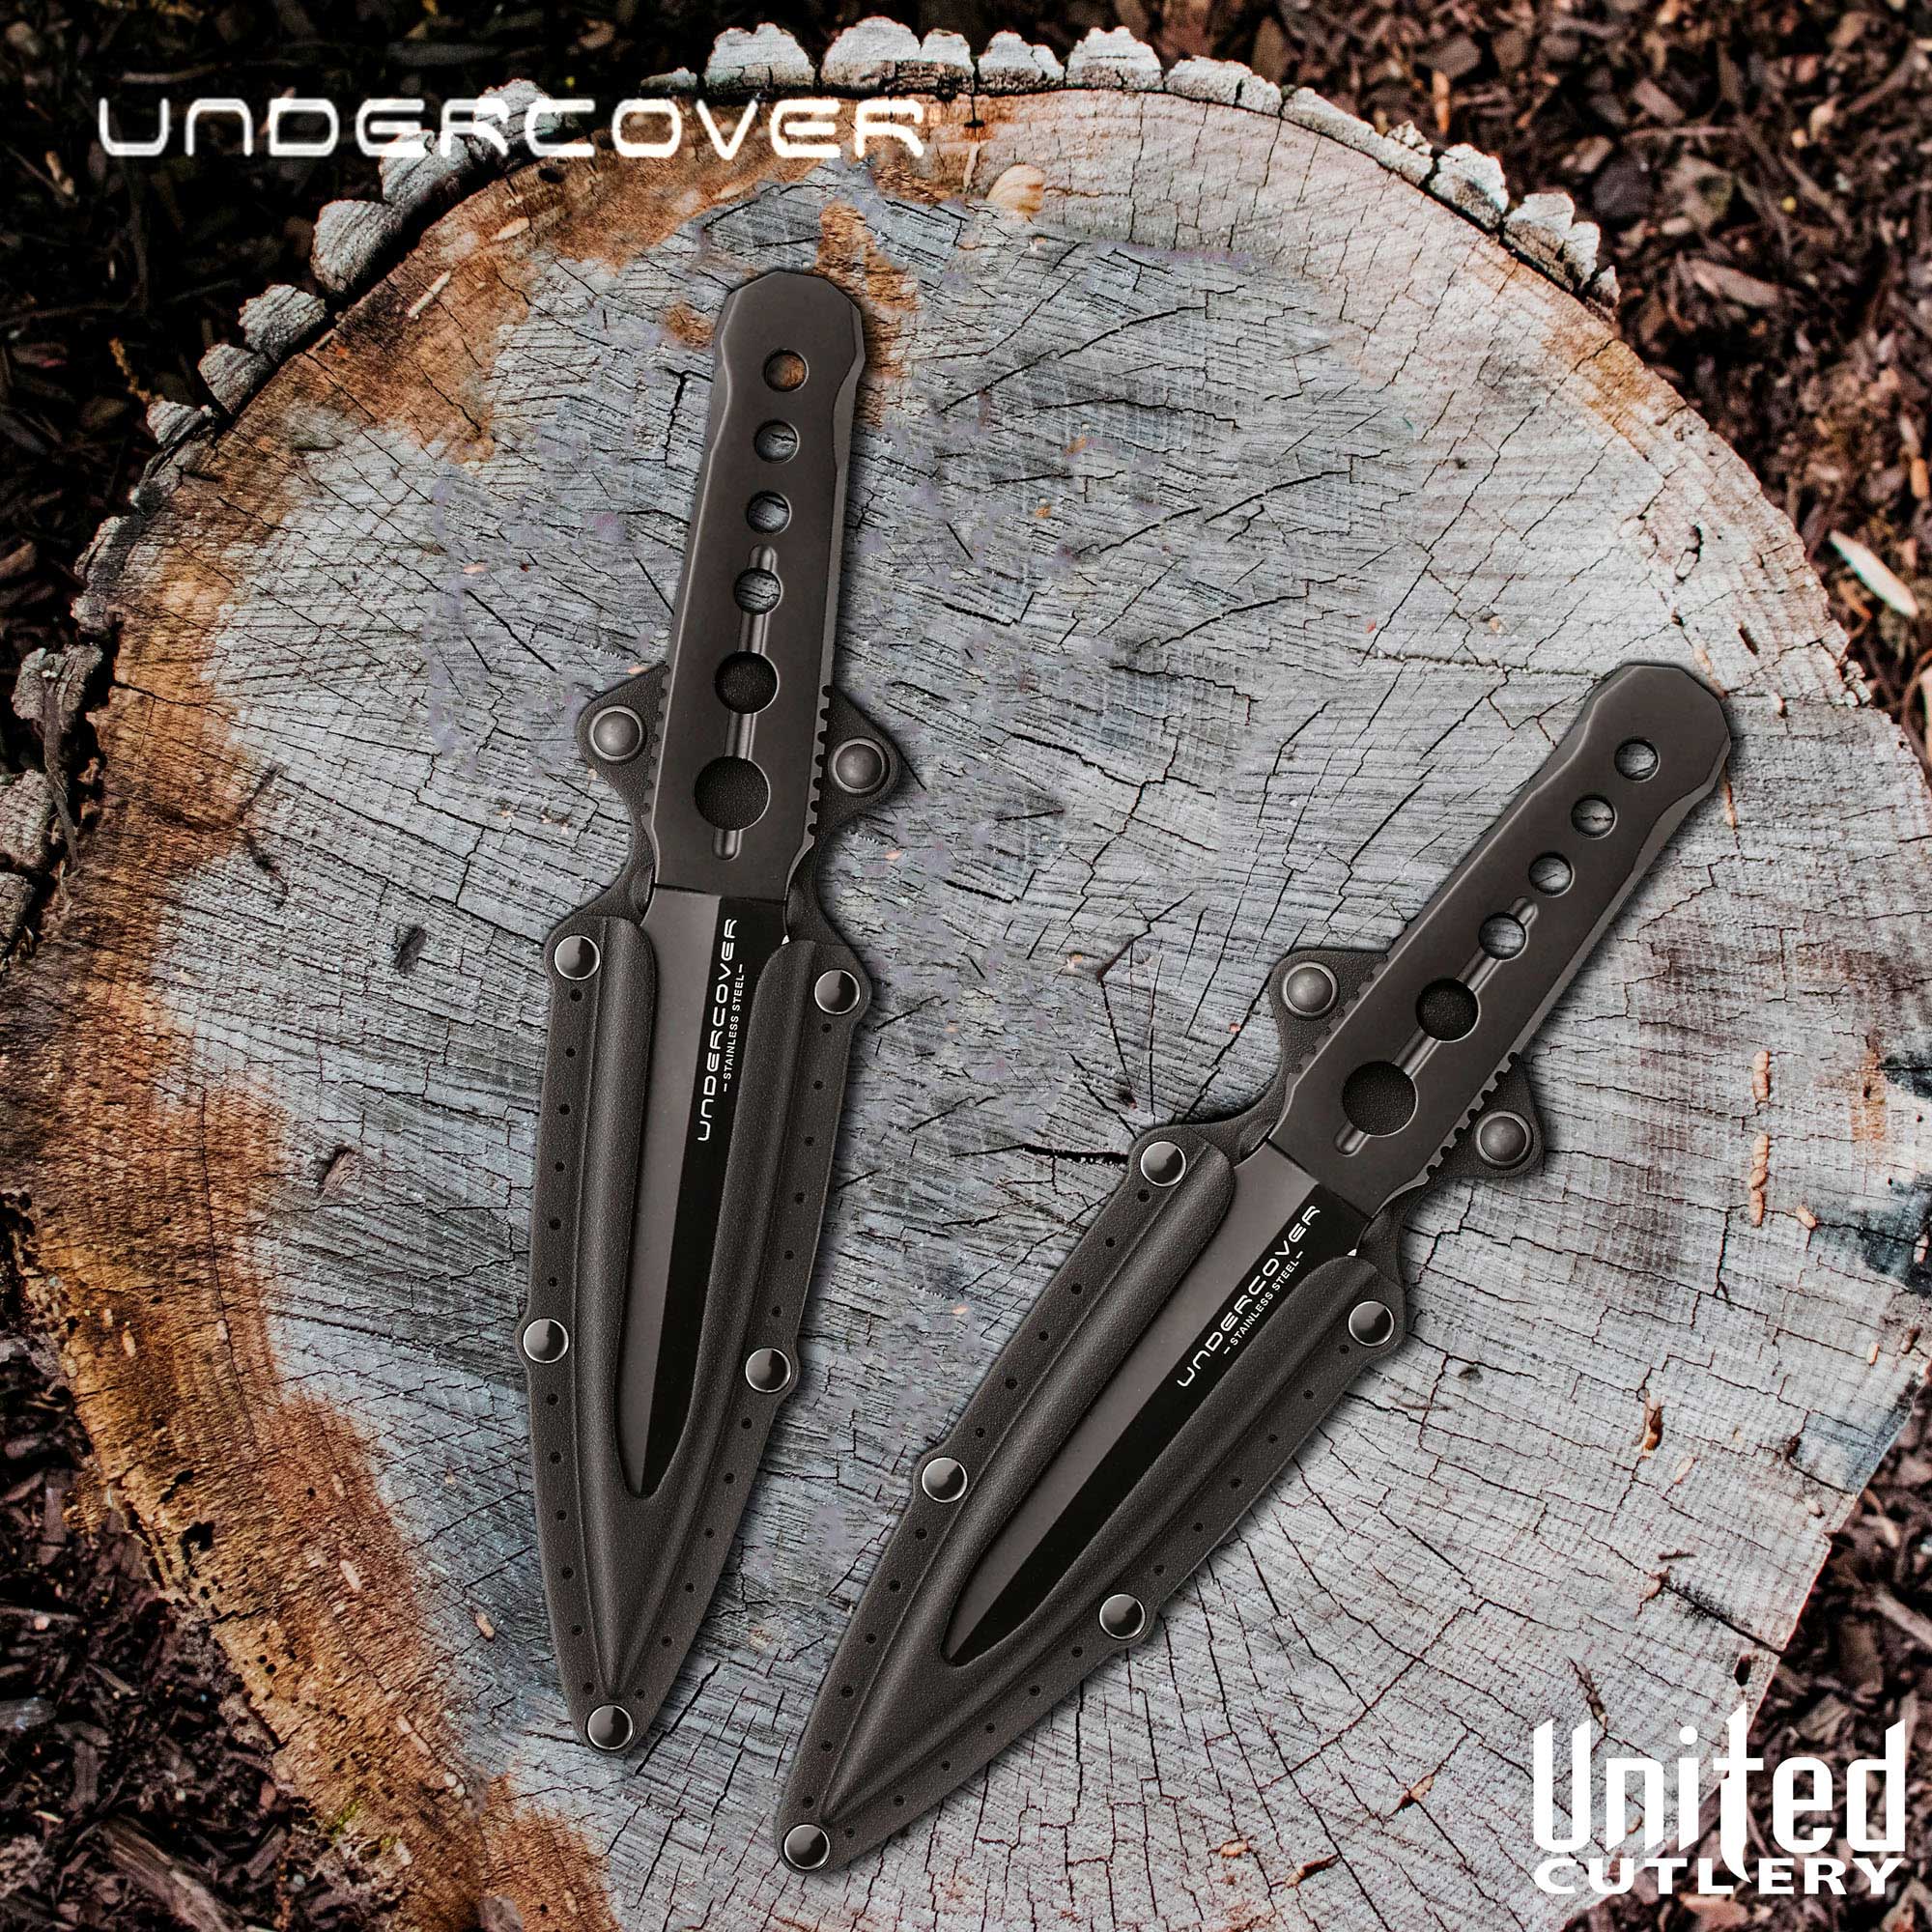 Two Undercover CIA Stinger Knives and Sheath